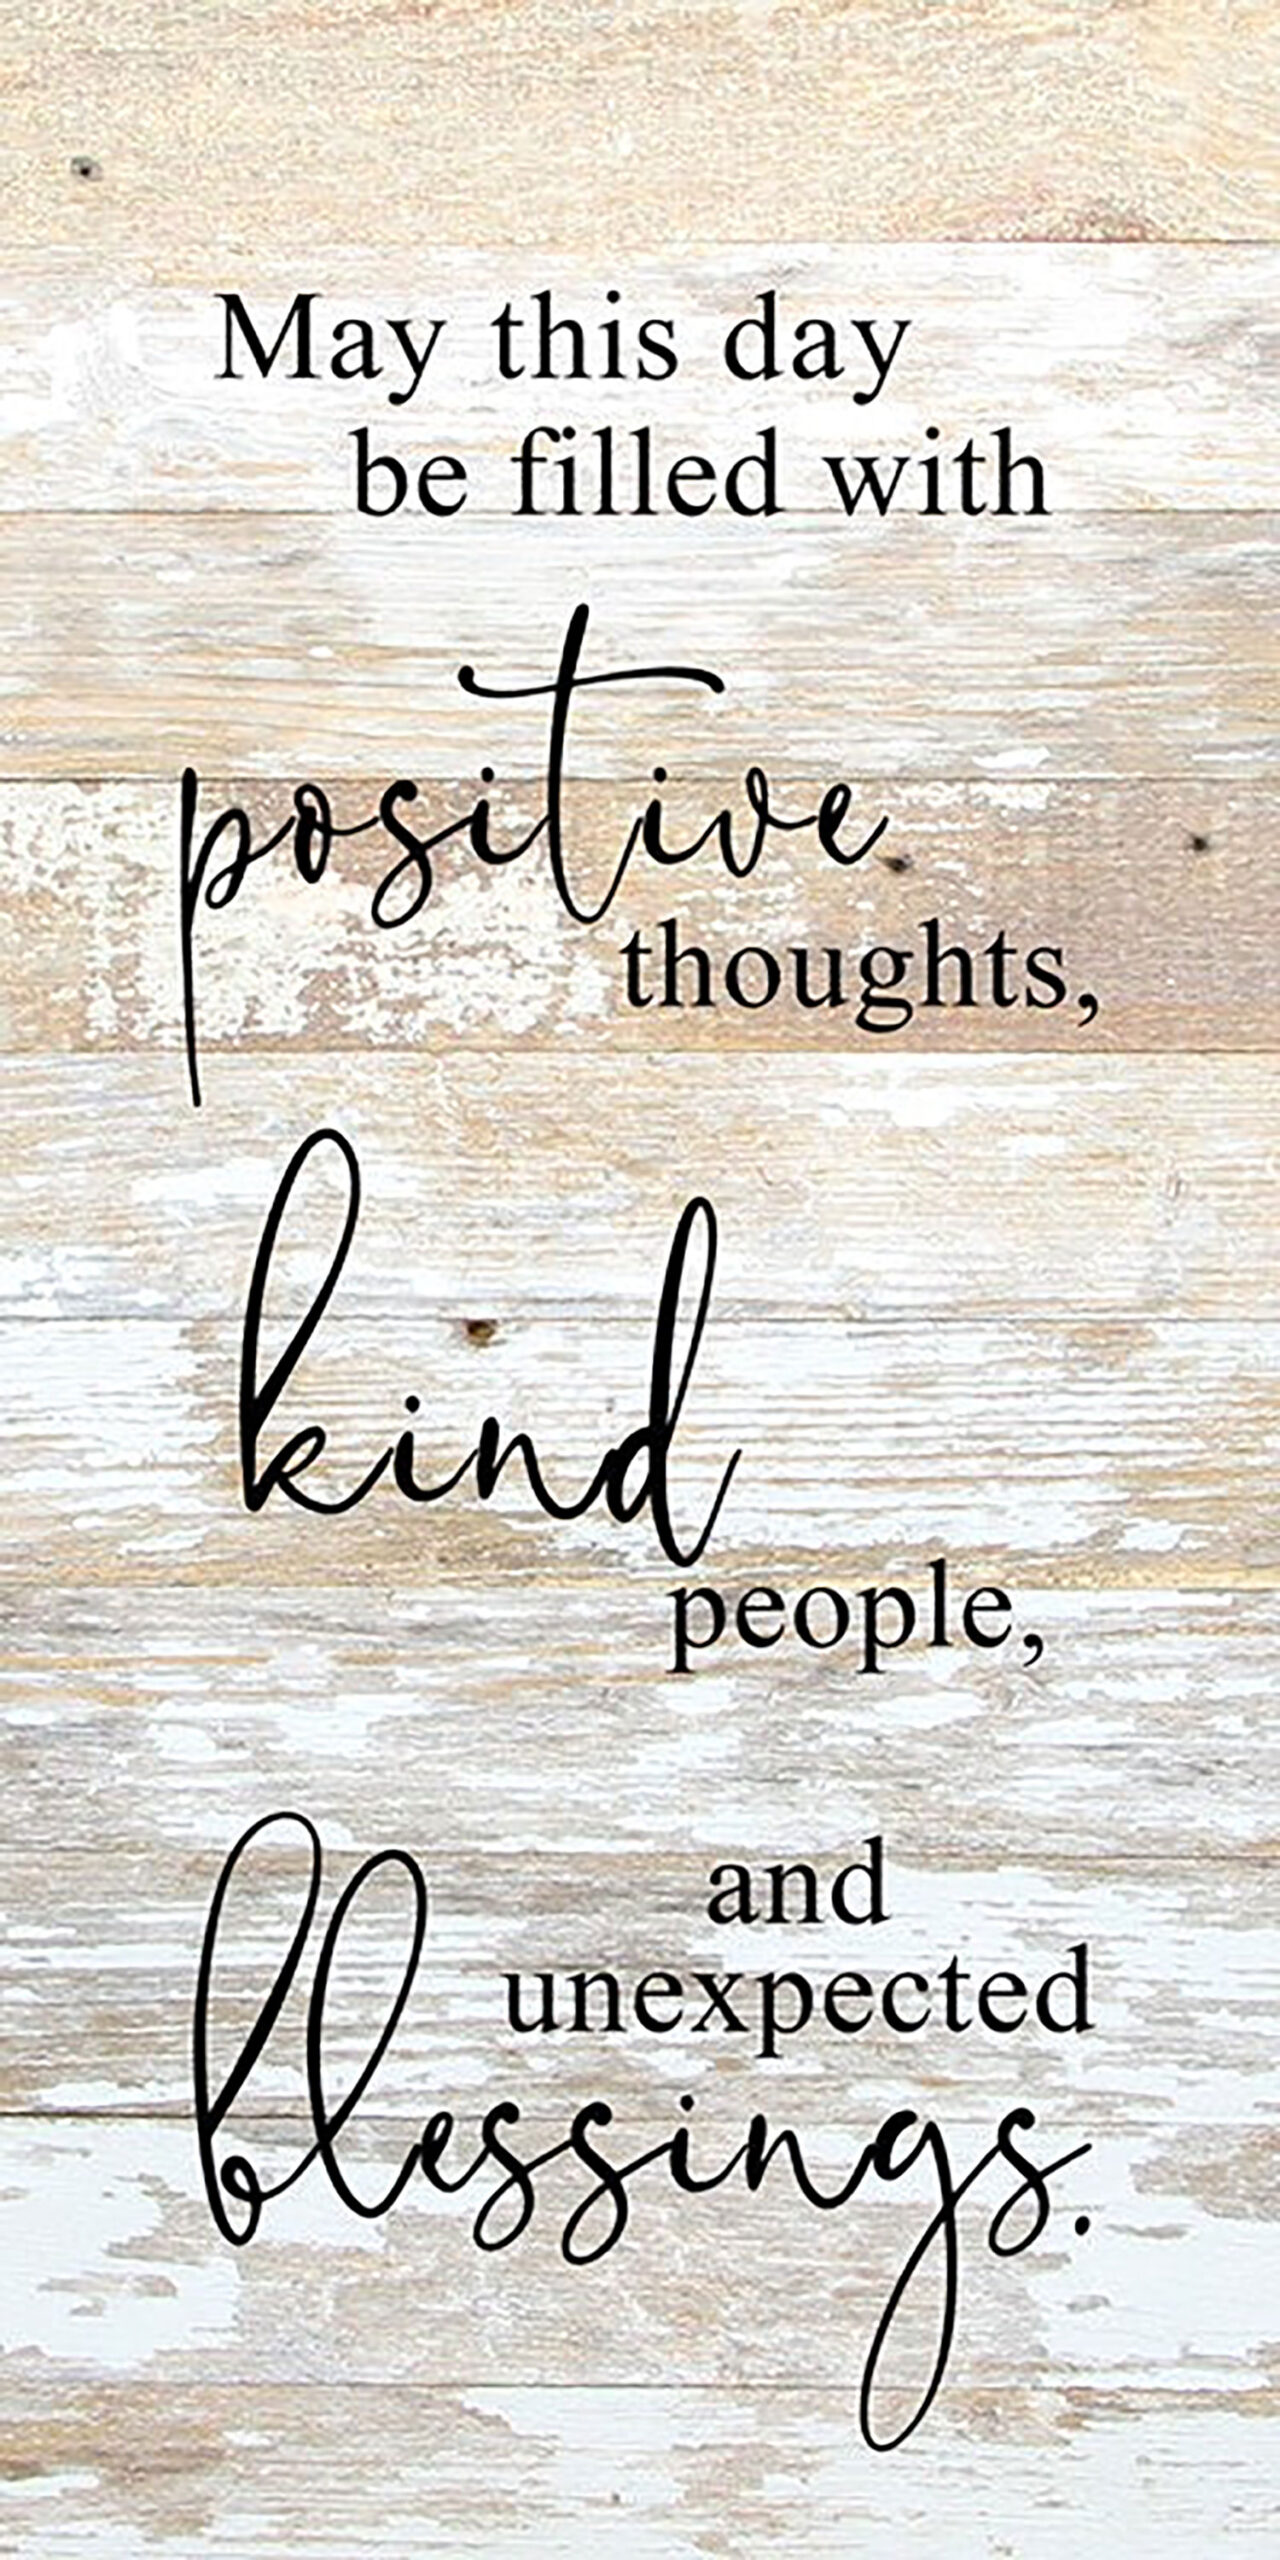 May this day be filled with positive thoughts, kind people, and unexpected blessings. / 12"x24" Reclaimed Wood Sign